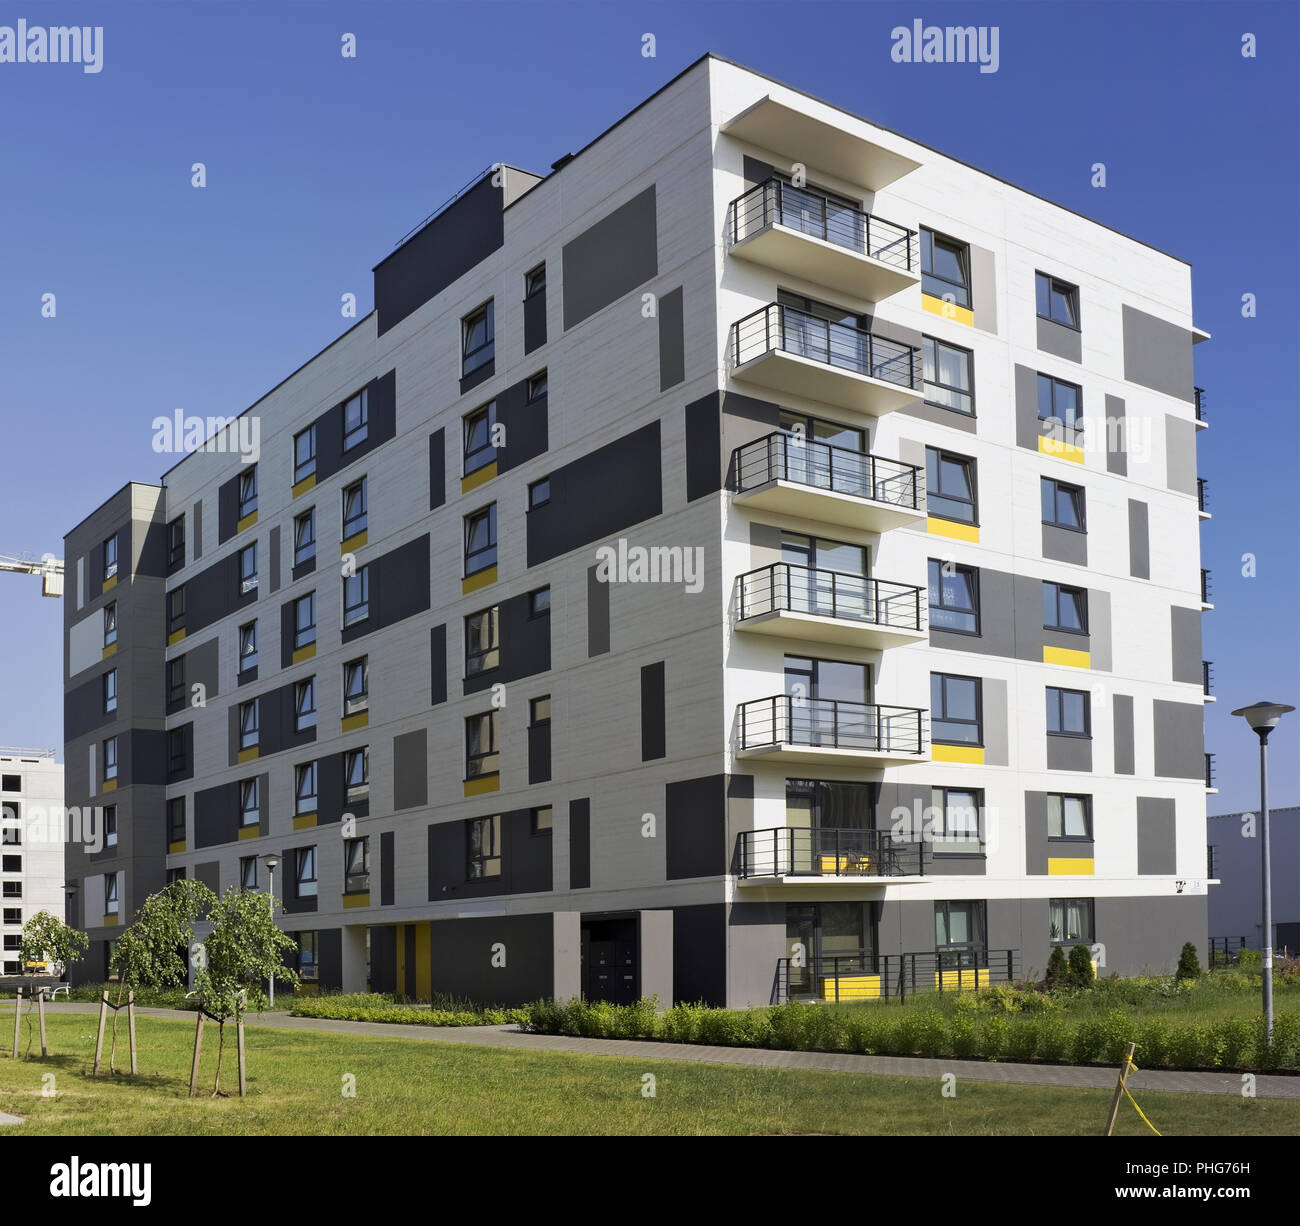 Modern modular house with low cost small-sized apartments Stock Photo